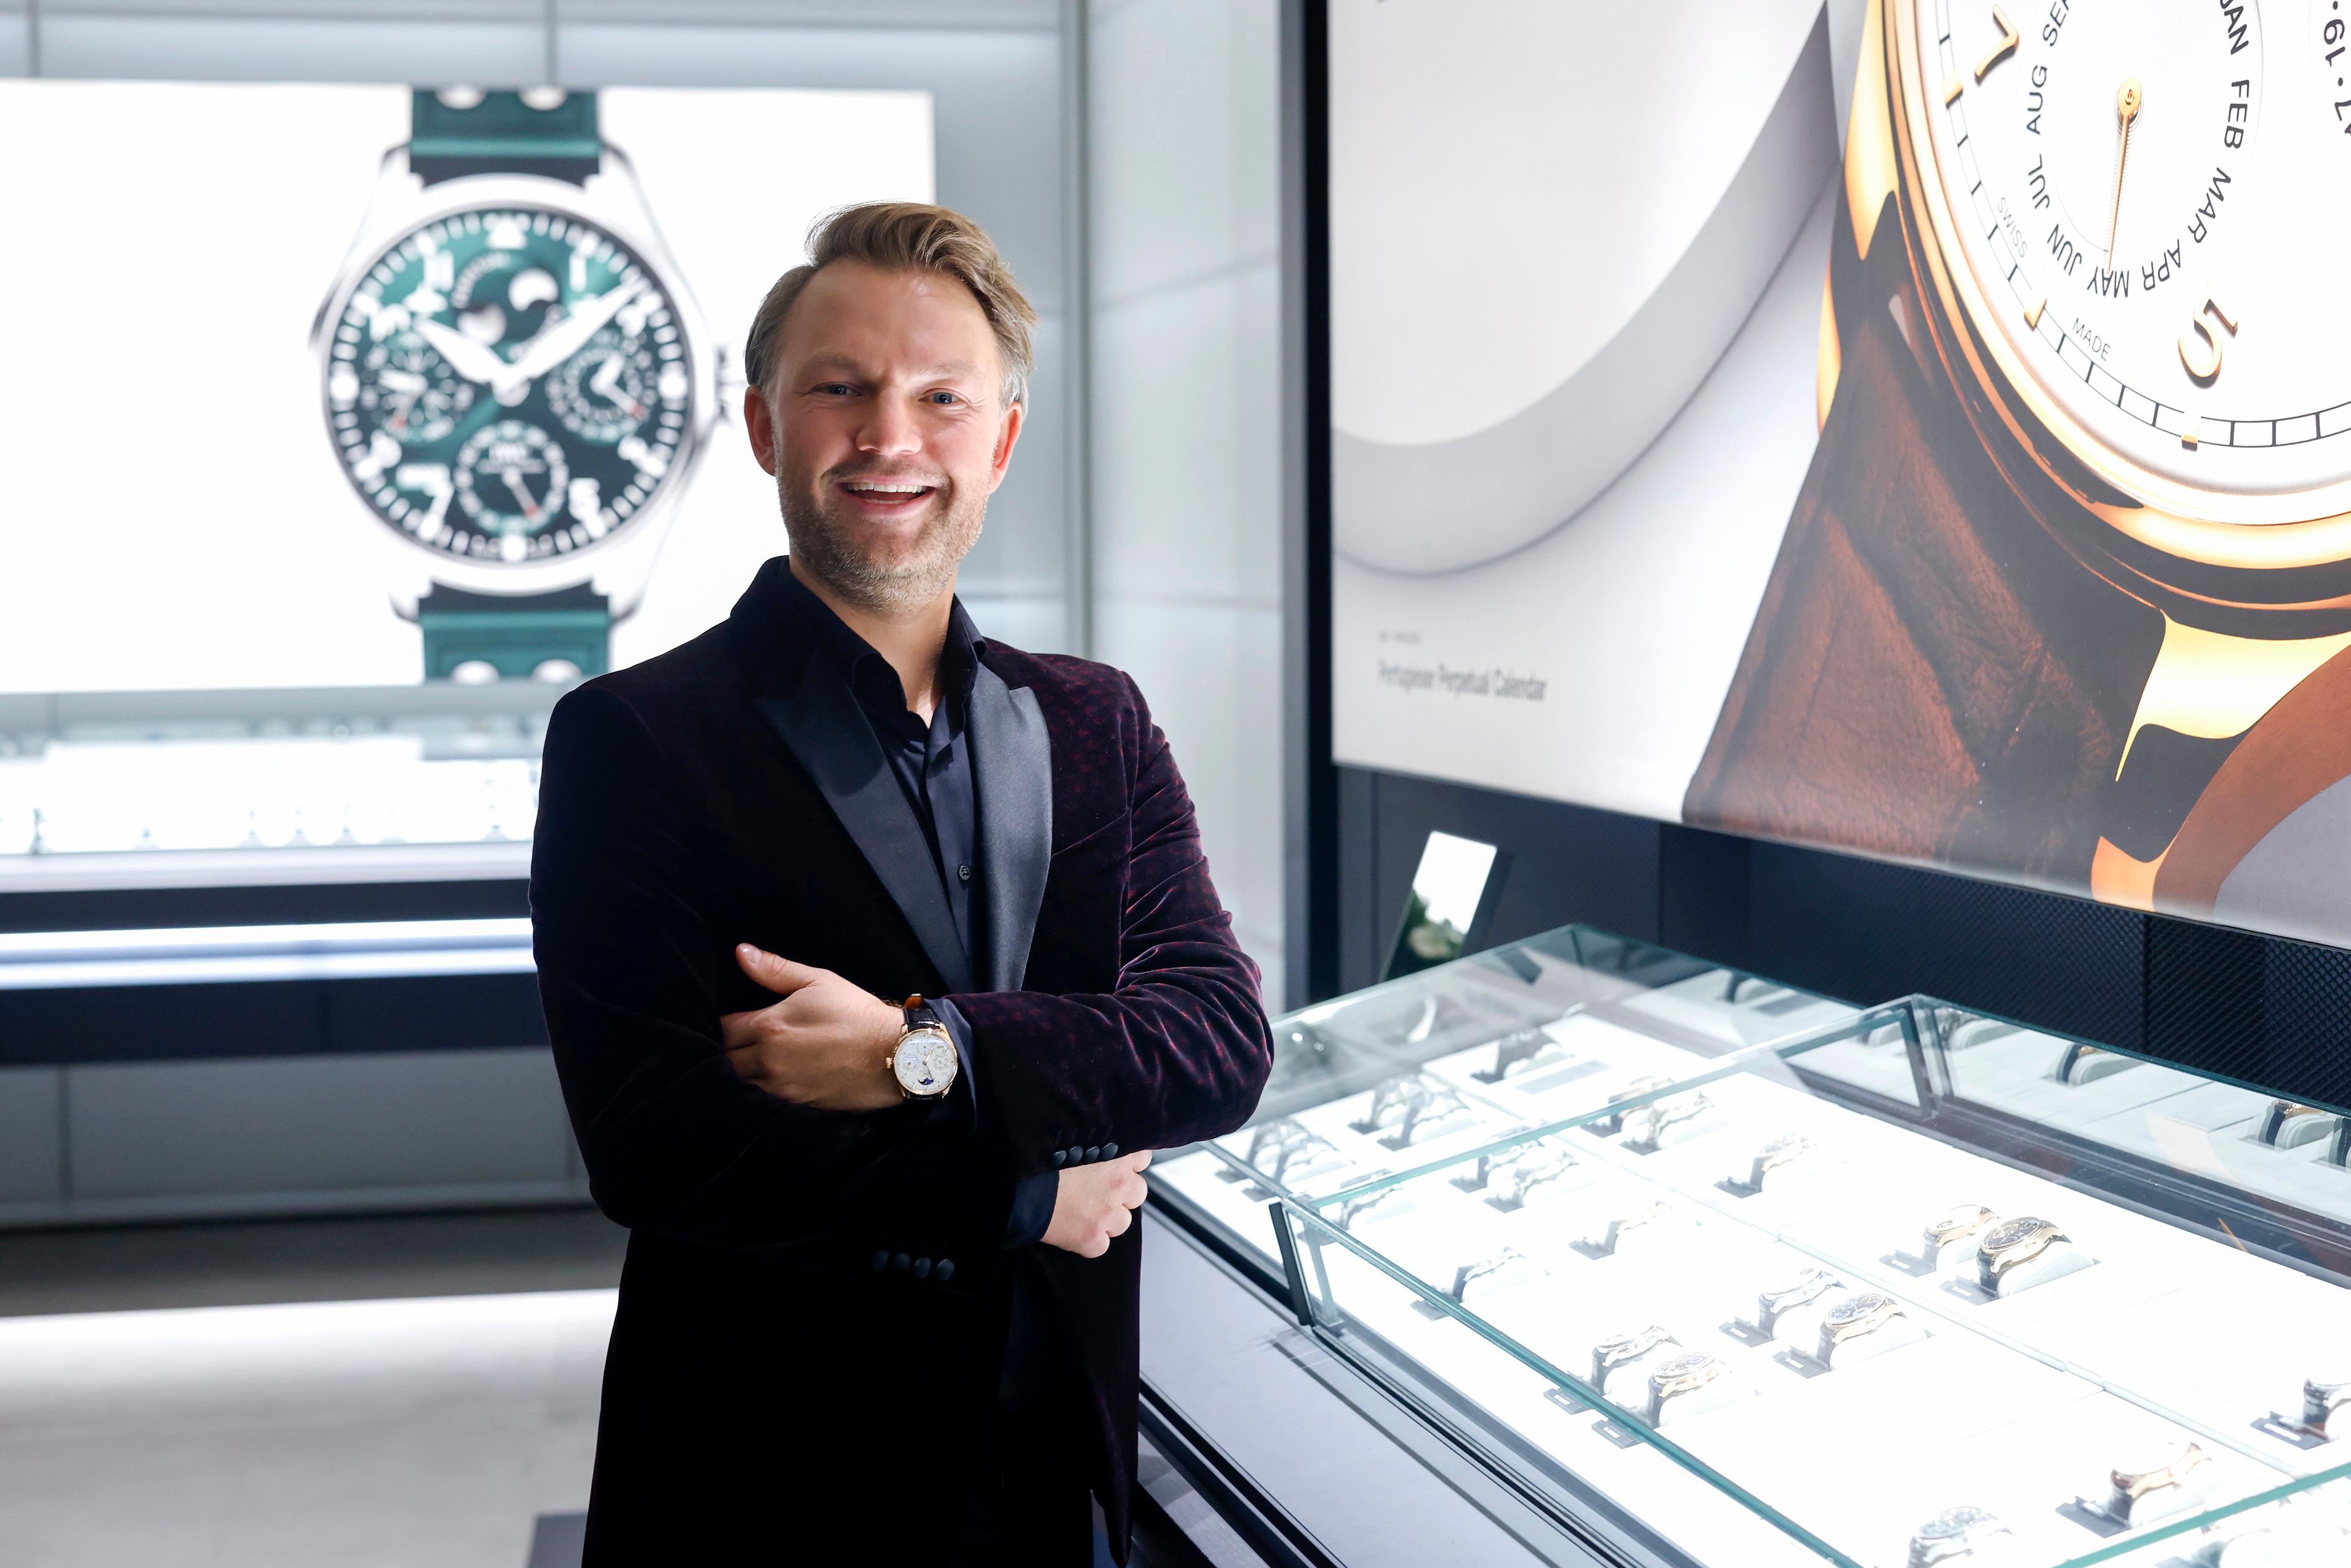 Welcome to the IWC Boutique in Berlin